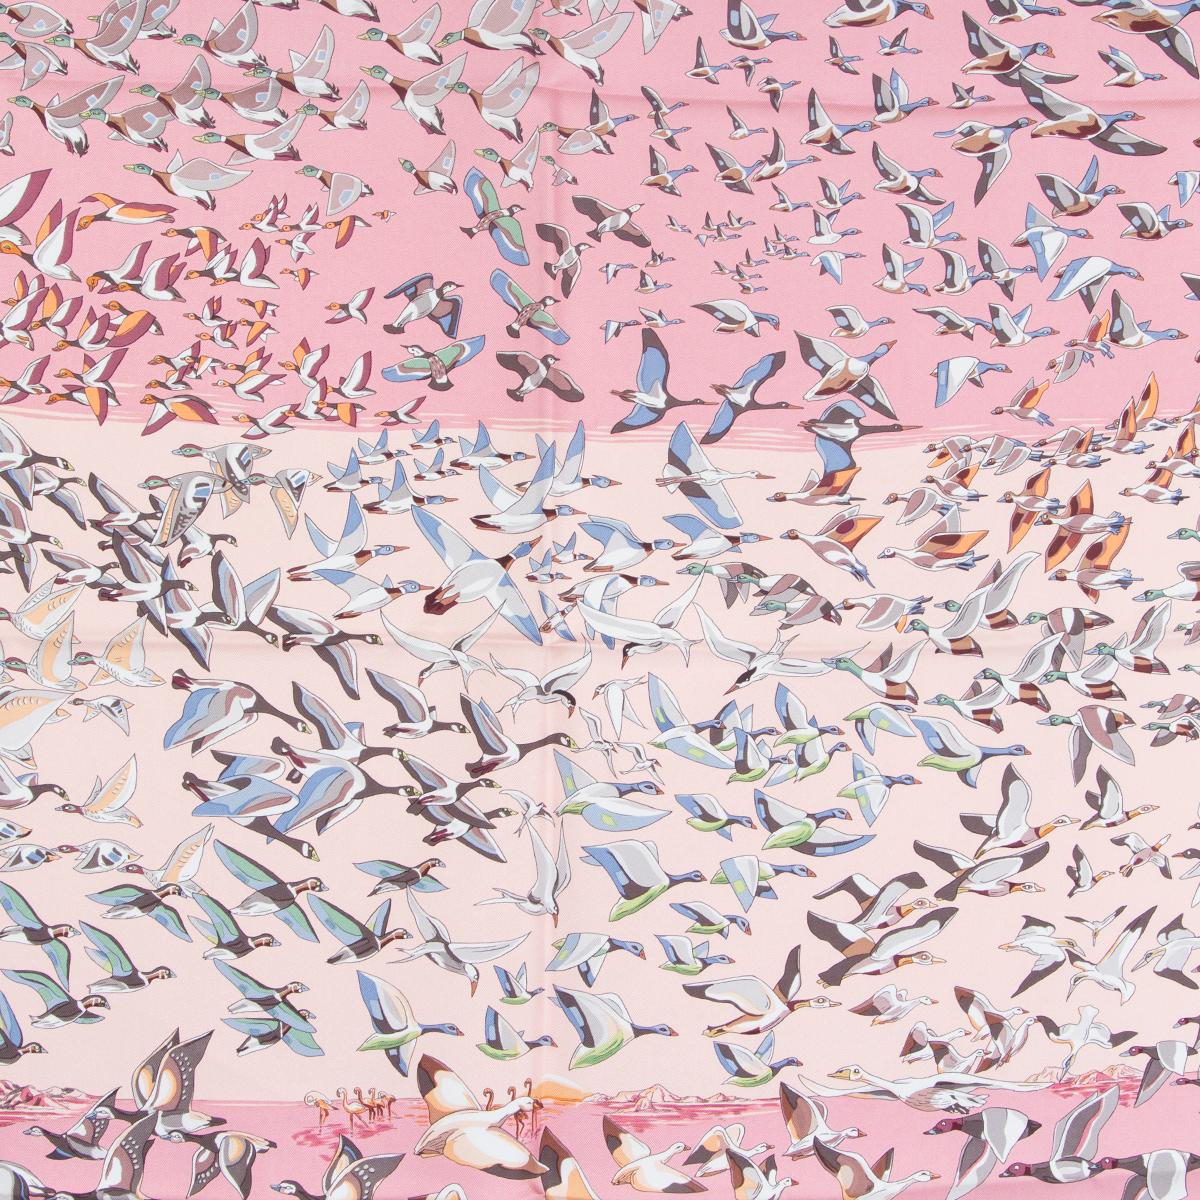 Hermès 'Libres Comme L'air 90' scarf in pink silk with details in baby pink, cream, light blue, light grey, grey, burgundy, f^green, salmon and purple. Has been worn and is in excellent condition.

Width 90cm (35.1in)
Height 90cm (35.1in)